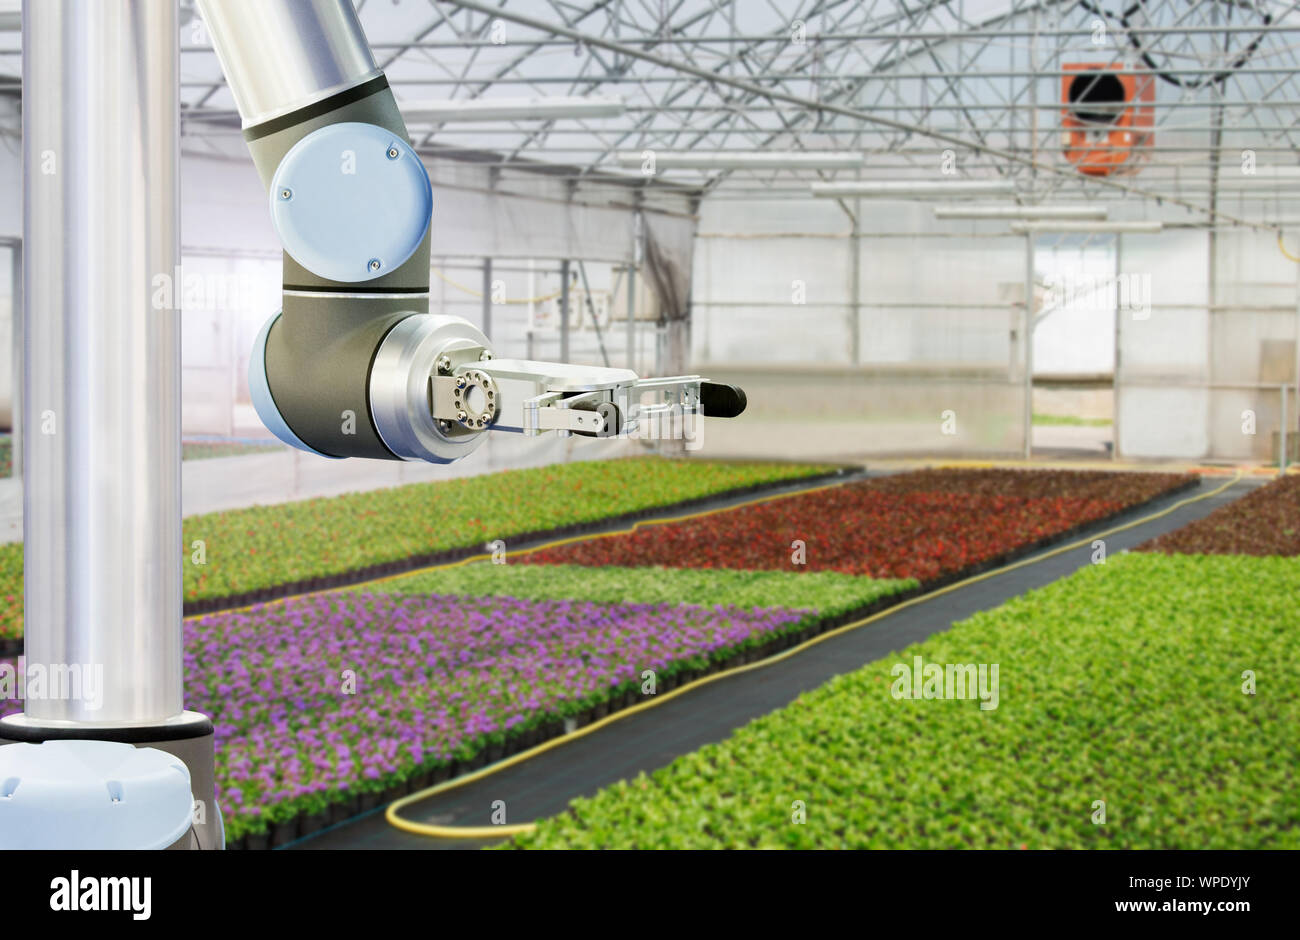 The robot arm is working in a greenhouse. Smart farming and digital agriculture Stock Photo